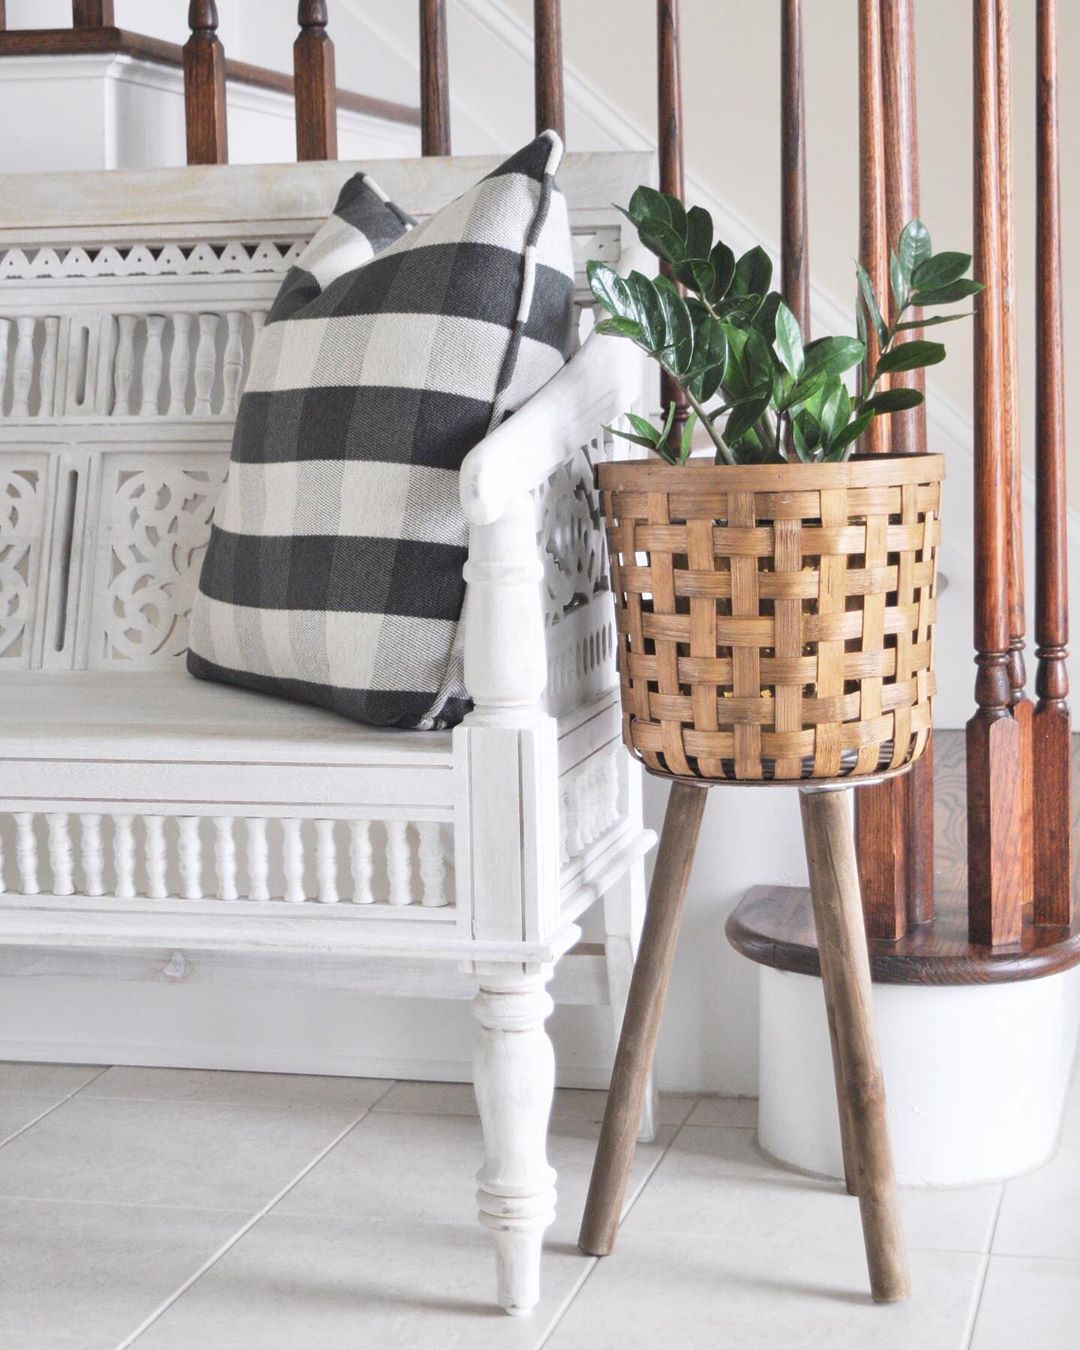 New Home Decor The only thing our entryway is missing is a precious planter like @cherishdreaml…